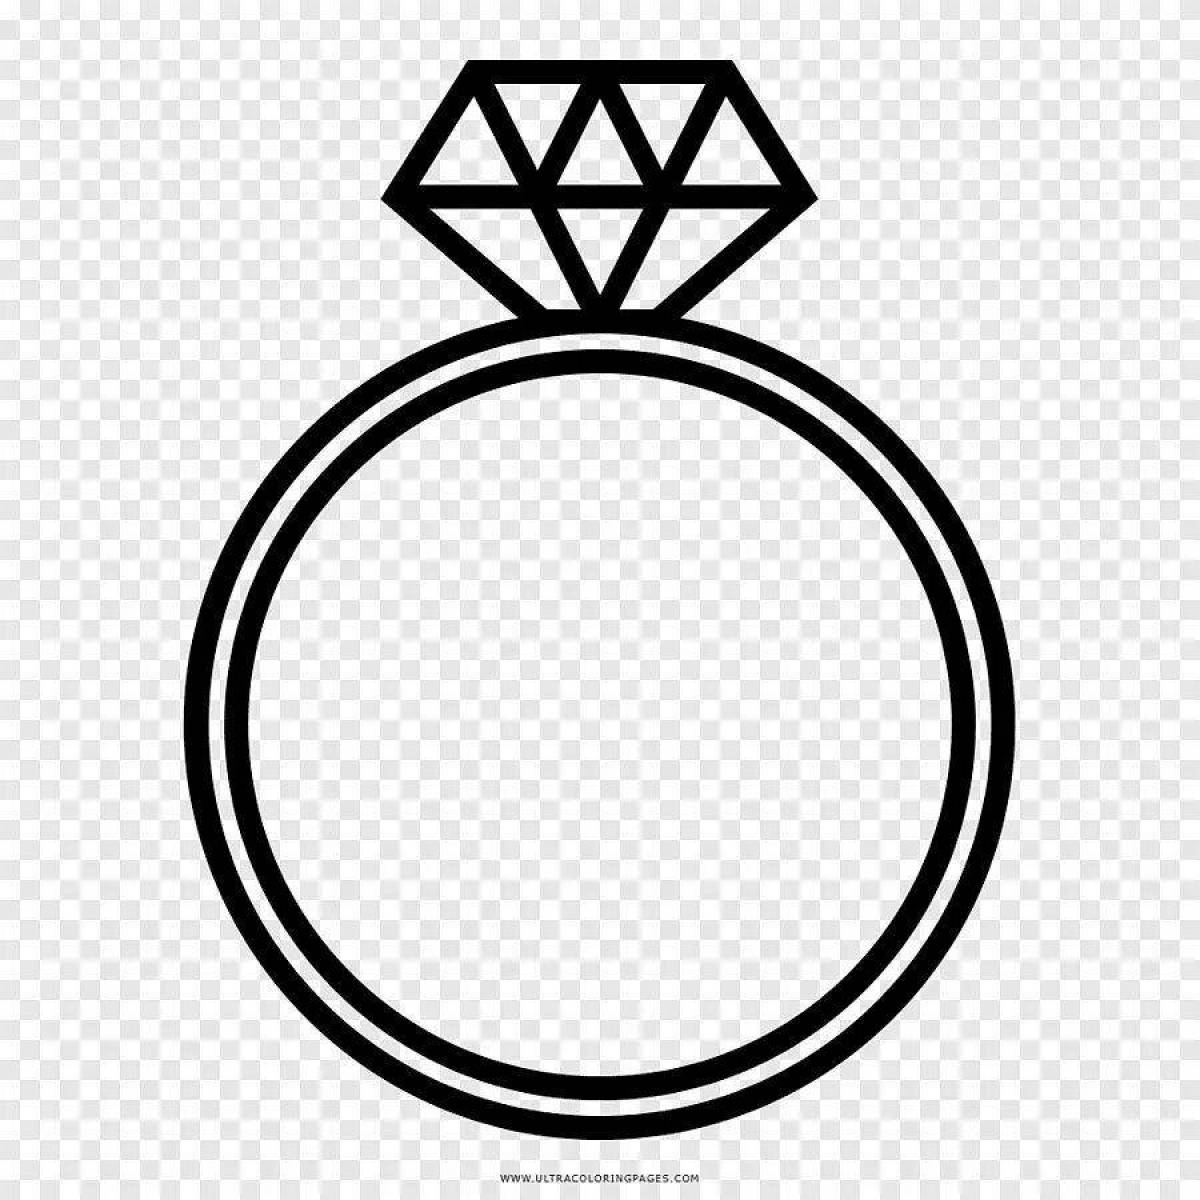 Violent coloring of the diamond ring